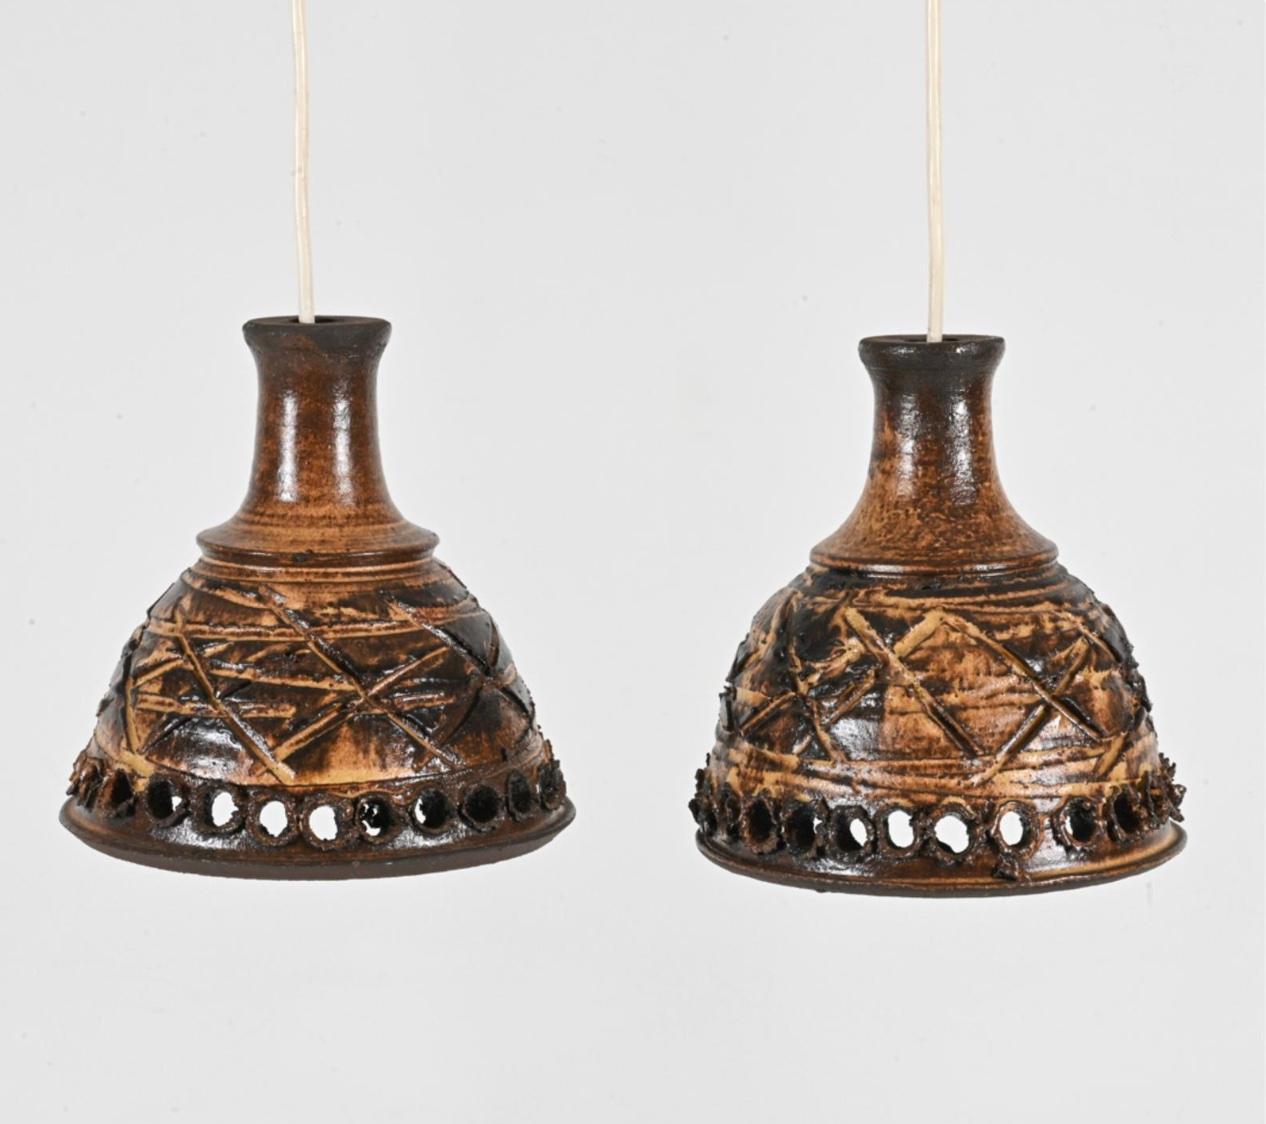 Pair of Scandinavian Danish modern handmade ceramic glazed hanging pendant lights Danish circa 1960. Brown glaze with holes has light bulb socket and hanging electrical wire. Need to be hardwired. 

Dimensions: H 8.25